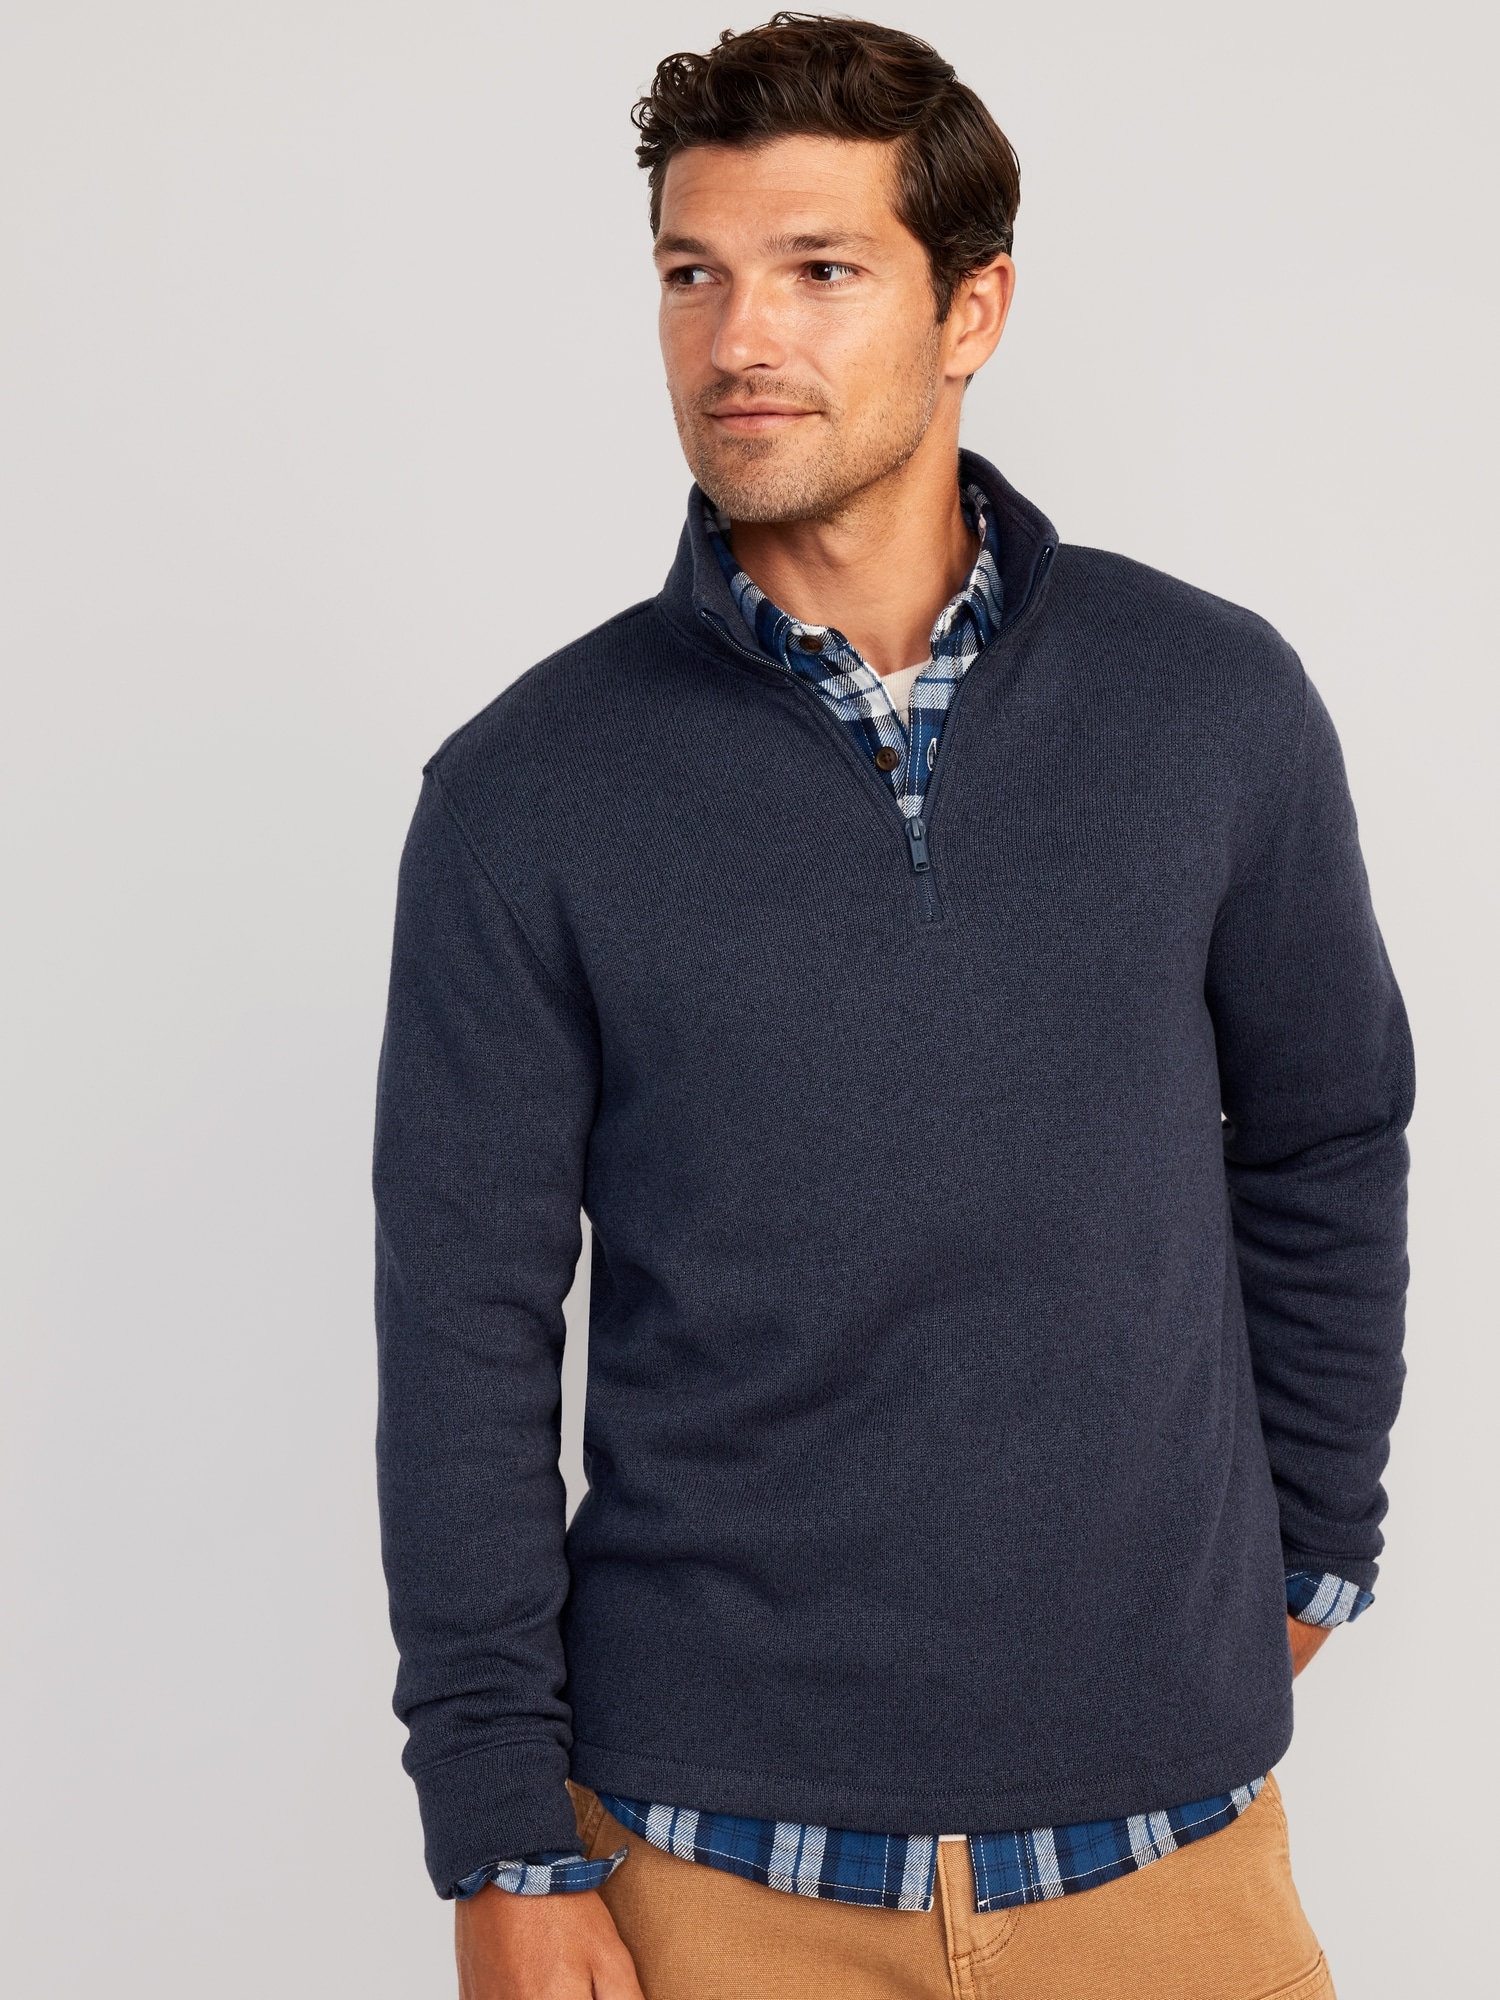 Sweater-Knit 1/4-Zip Pullover for Men | Old Navy